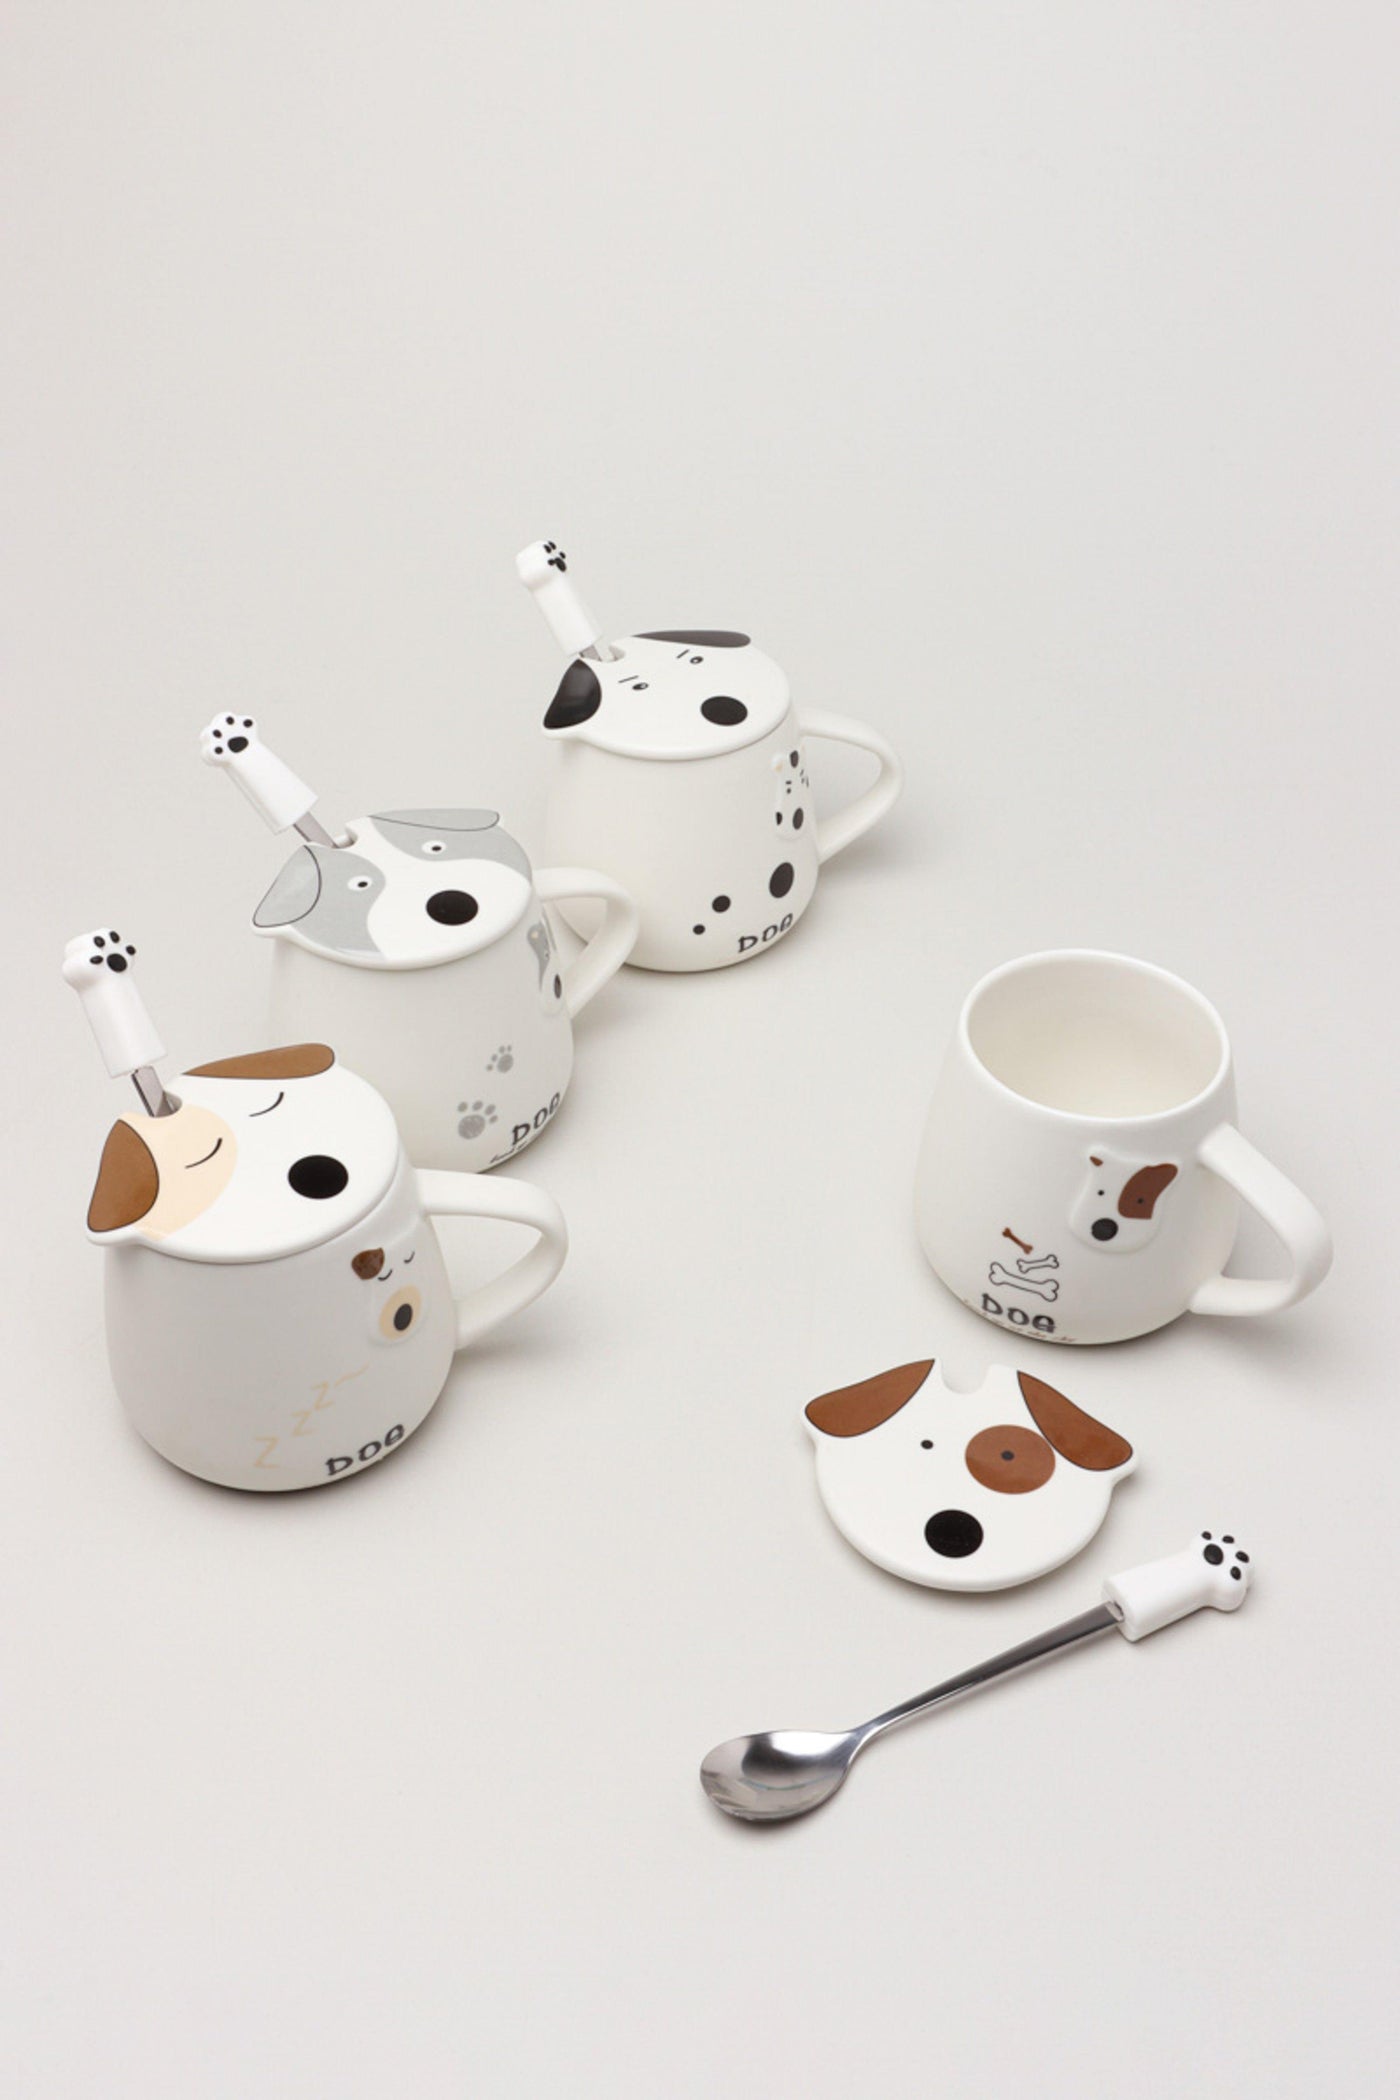 Gdecorstore Mugs and Cups Dog Ceramic Coffee Tea Mug With Matching Lid and Spoon